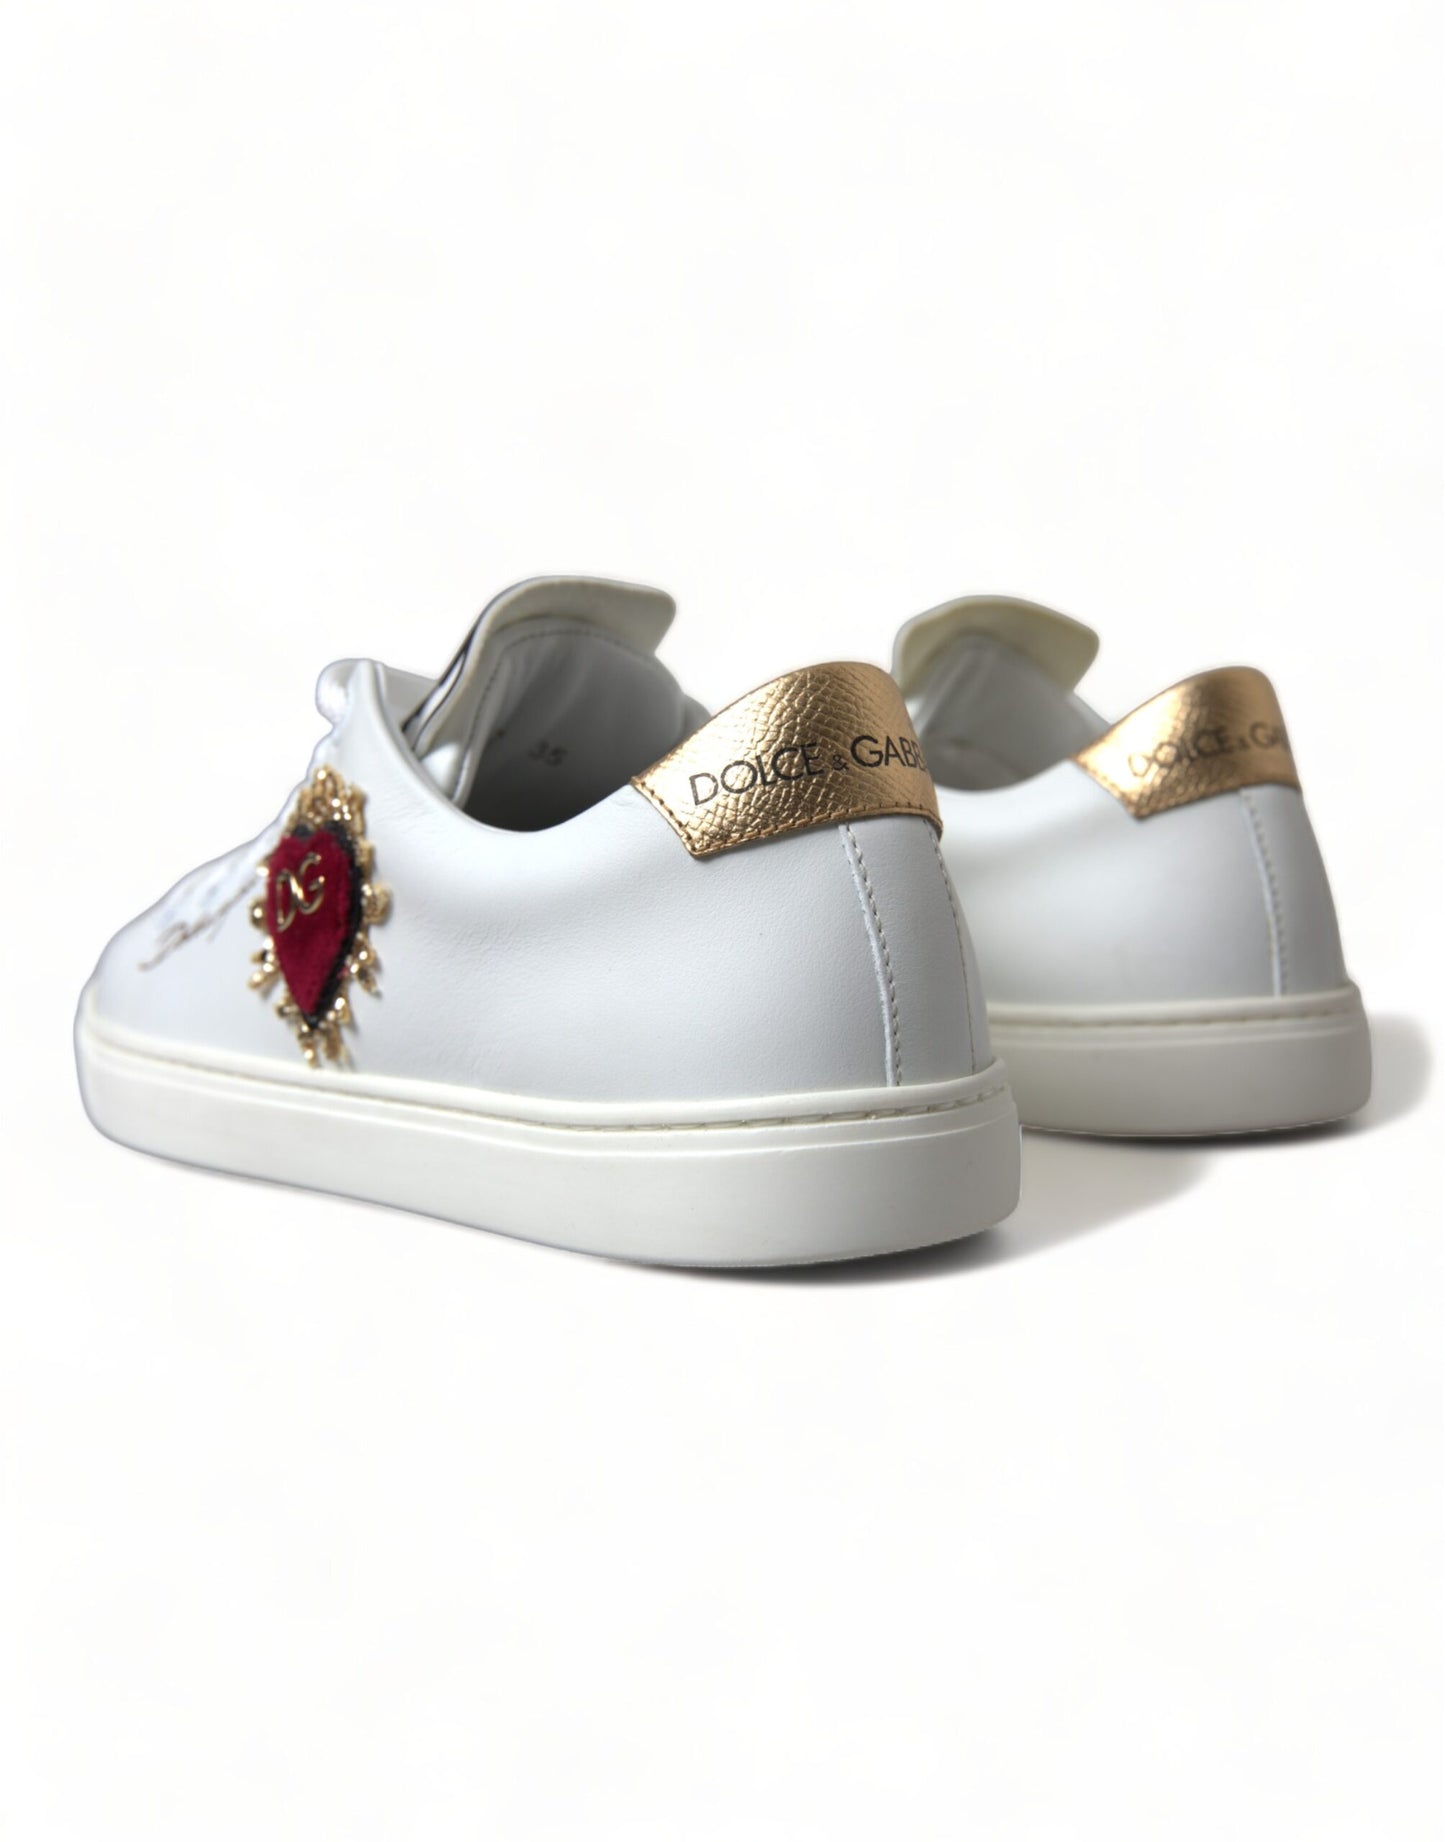 Dolce & Gabbana Elegant White Leather Sneakers with Gold Studs